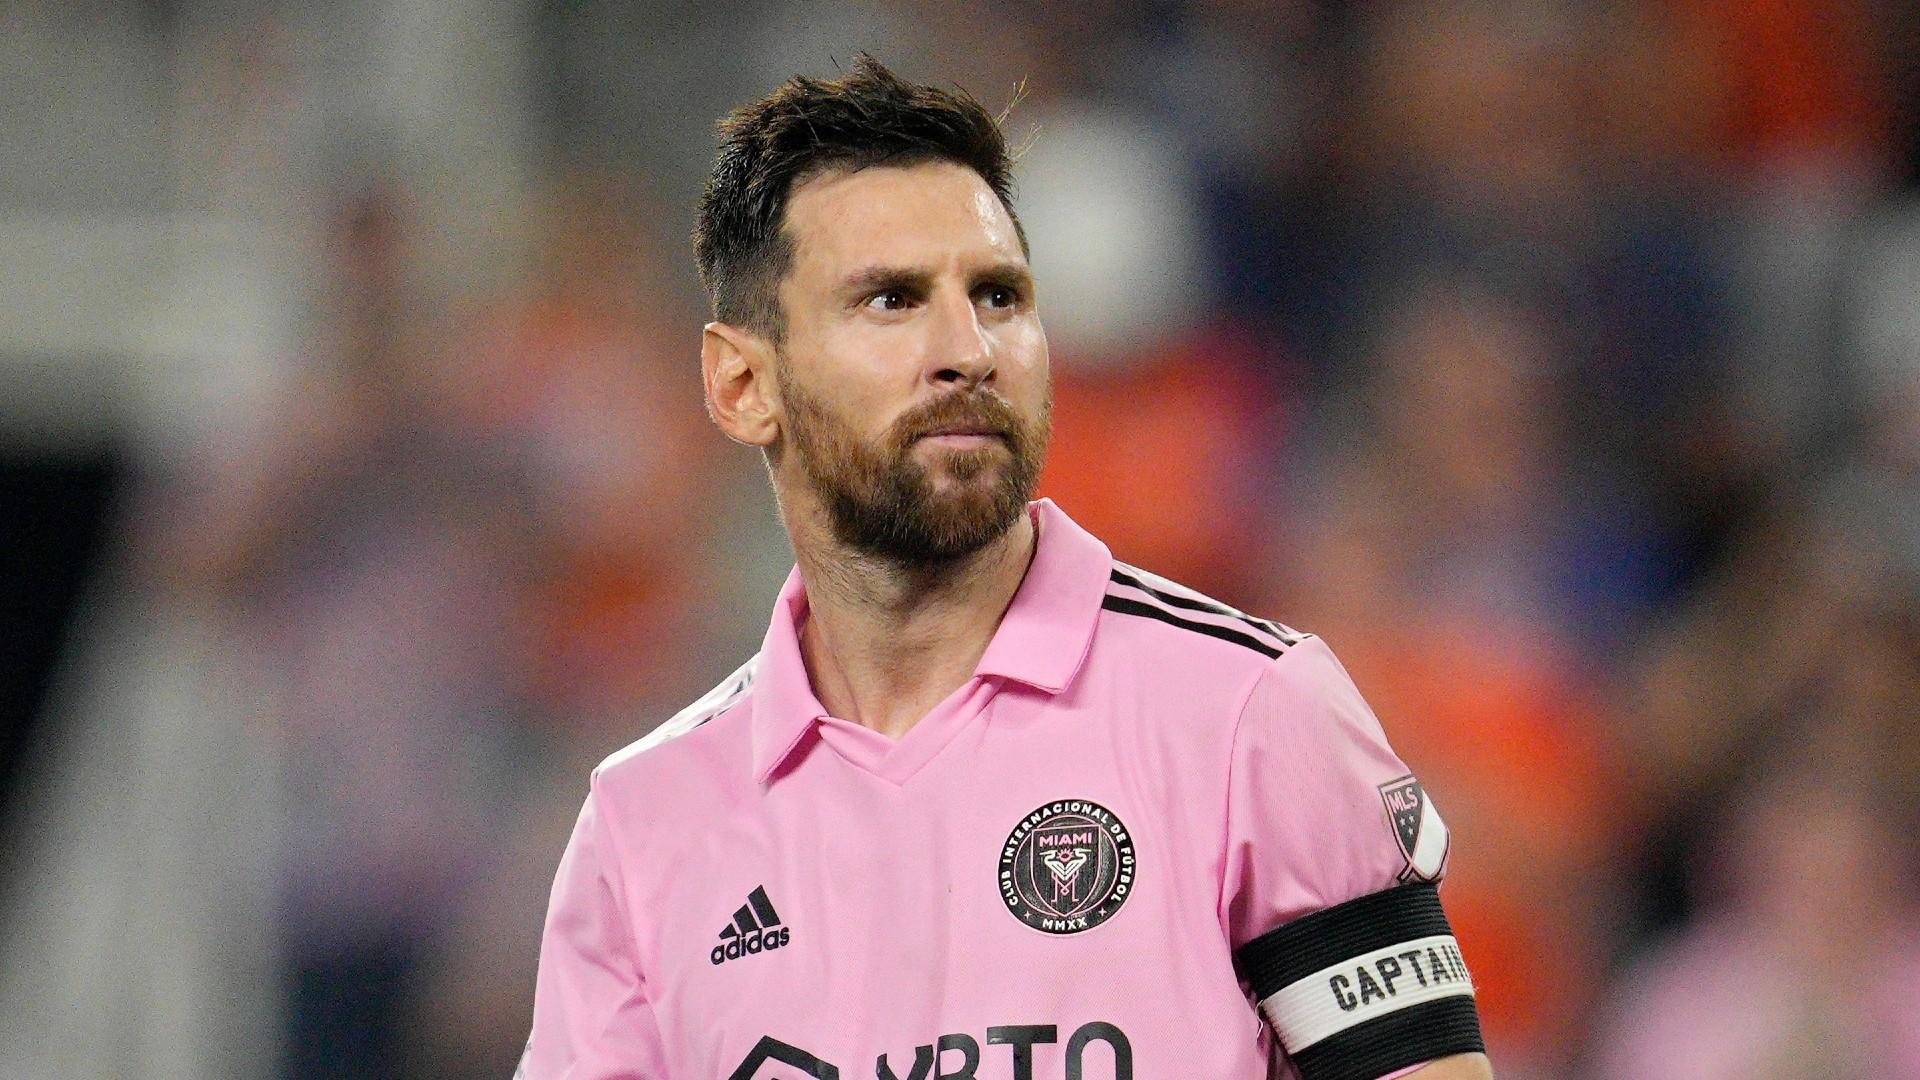 Messi Is Out Of Contention For MLS Most Valuable Player Award